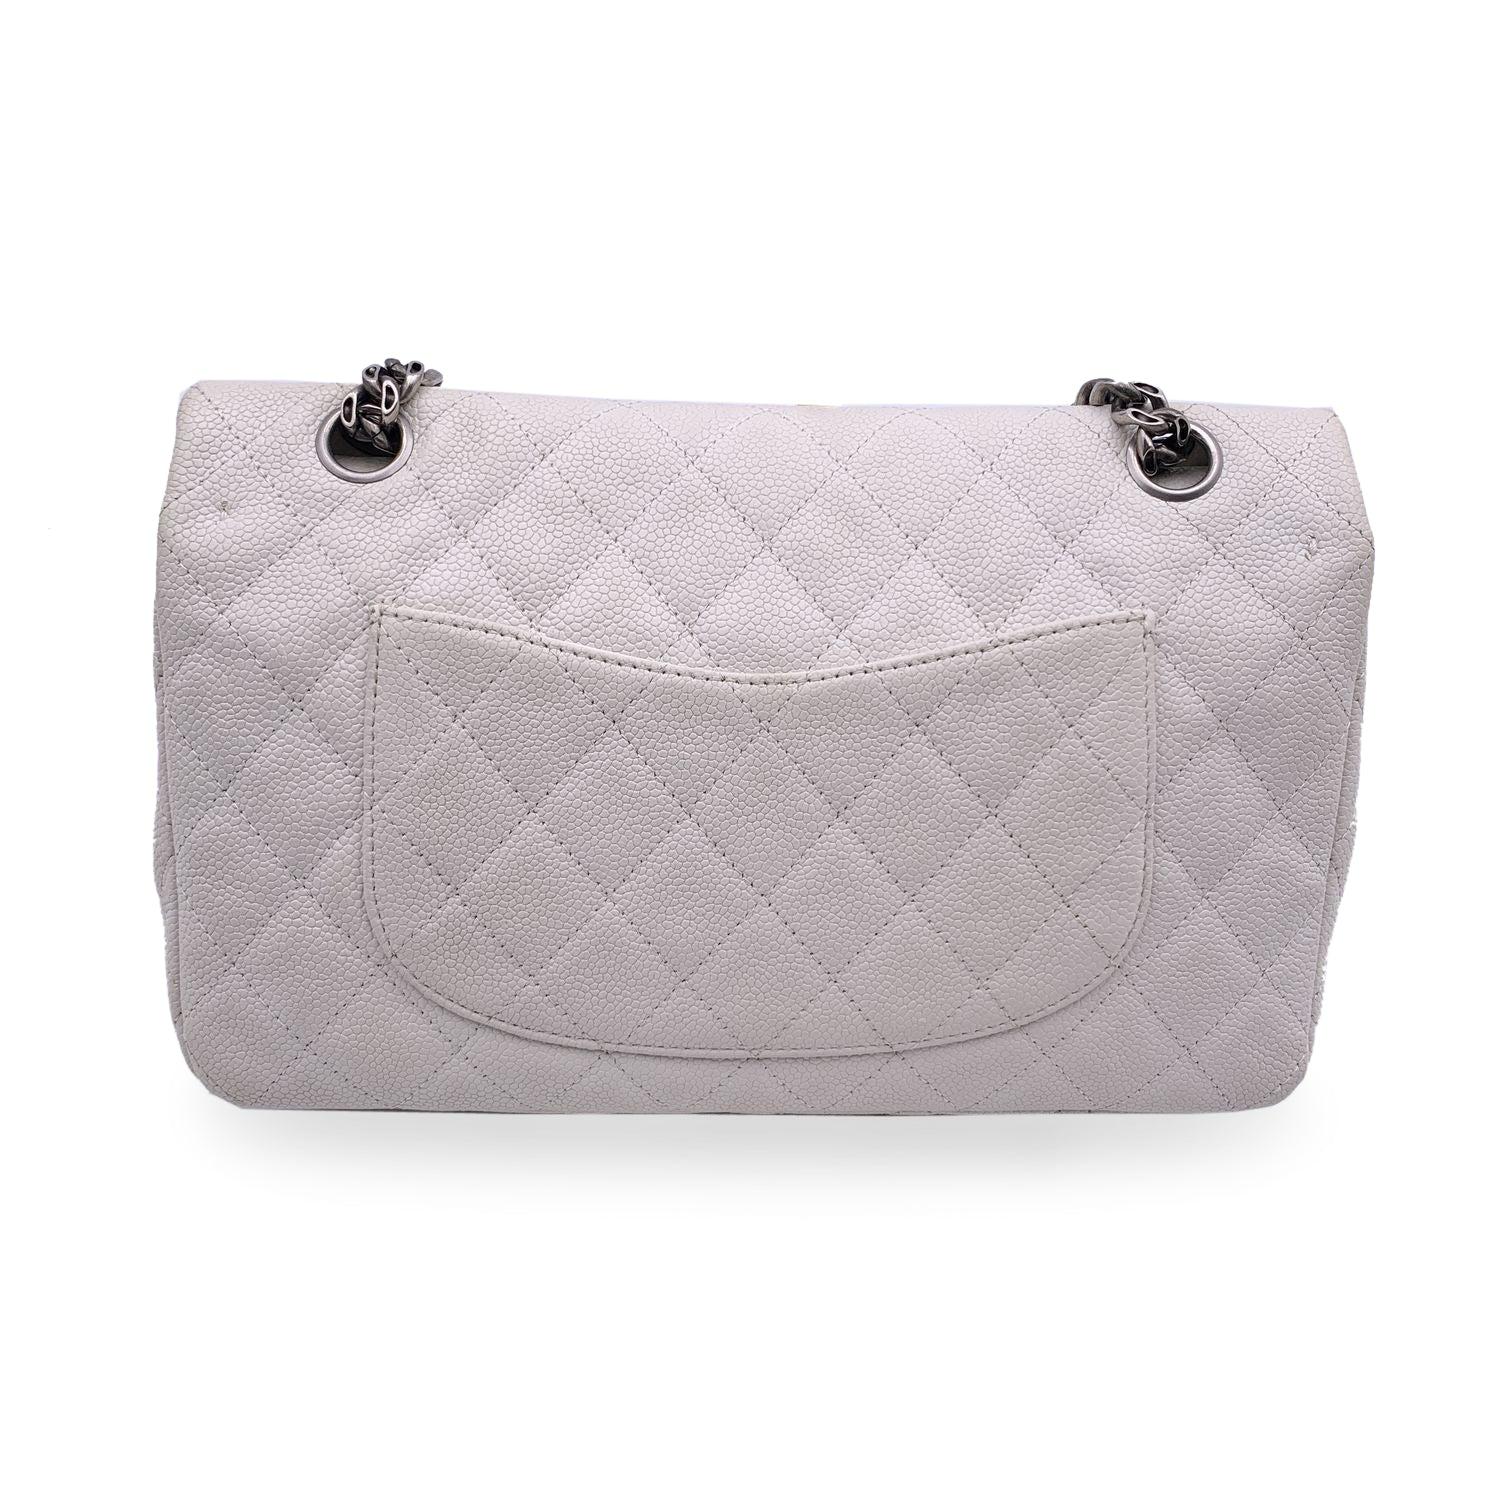 This beautiful Bag will come with a Certificate of Authenticity provided by Entrupy. The certificate will be provided at no further cost Beautiful Chanel '2.55 Reissue - 225 Medium' Shoulder Bag. Period/Era:2007-2008. The bag is crafted in white